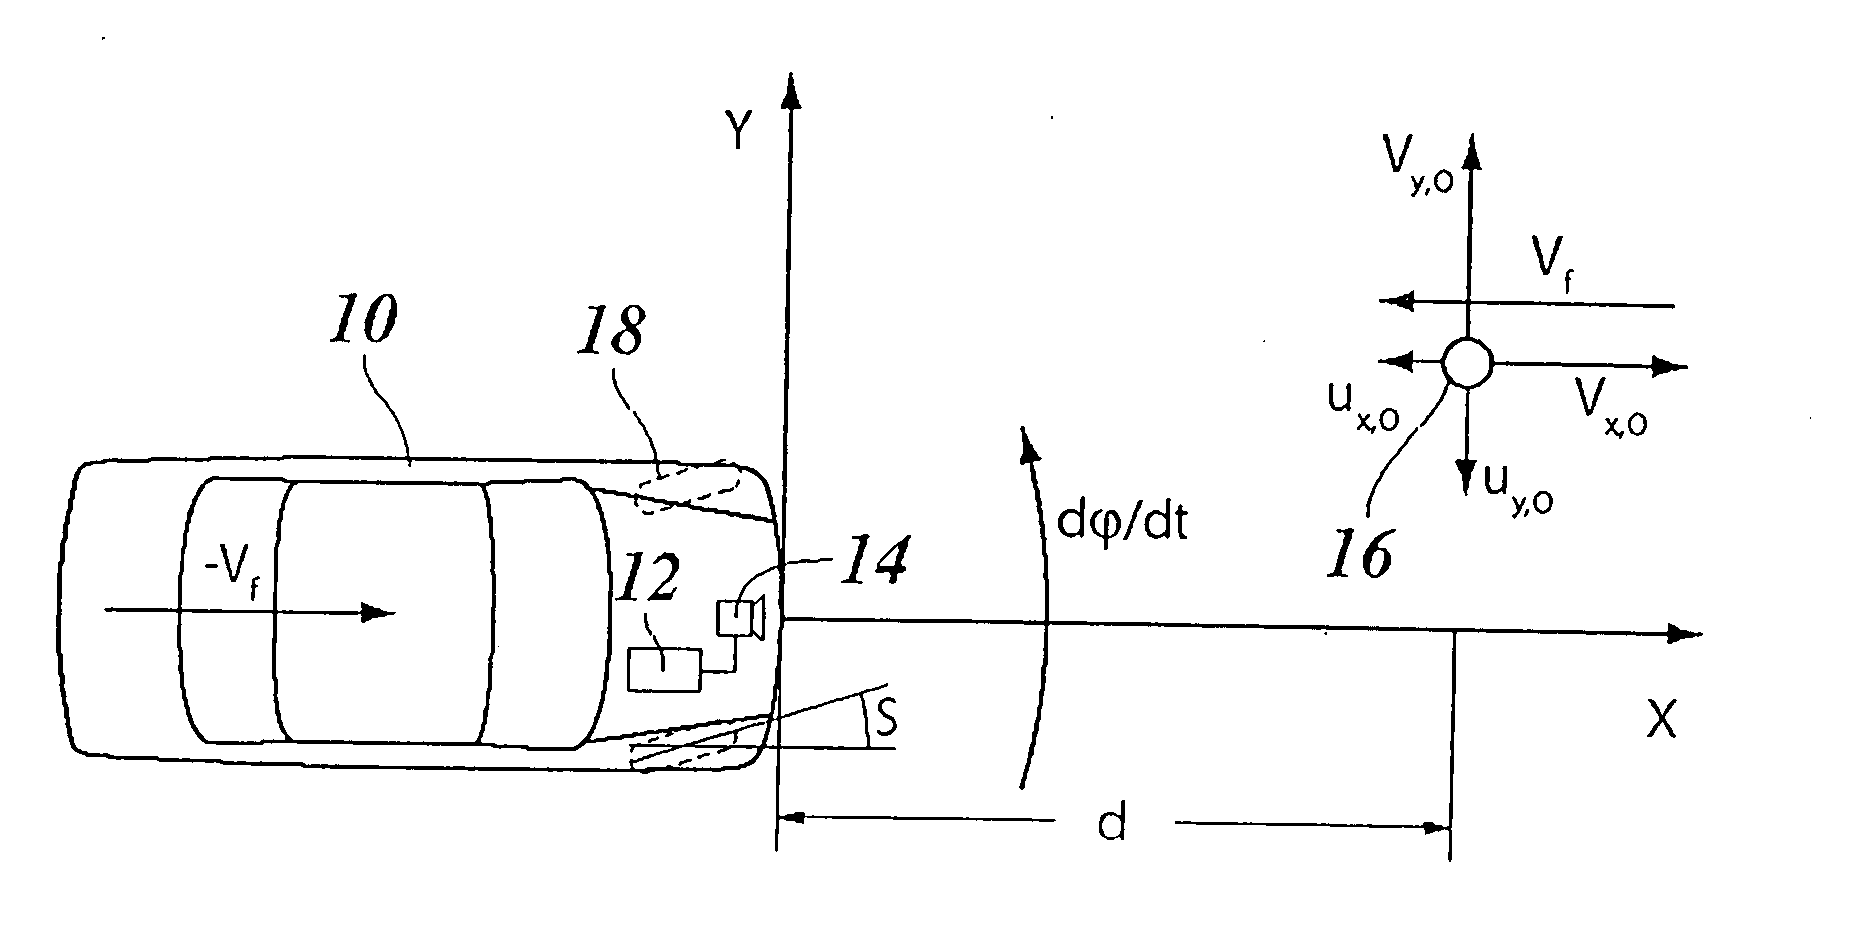 Driver assistance system having a device for recognizing stationary objects